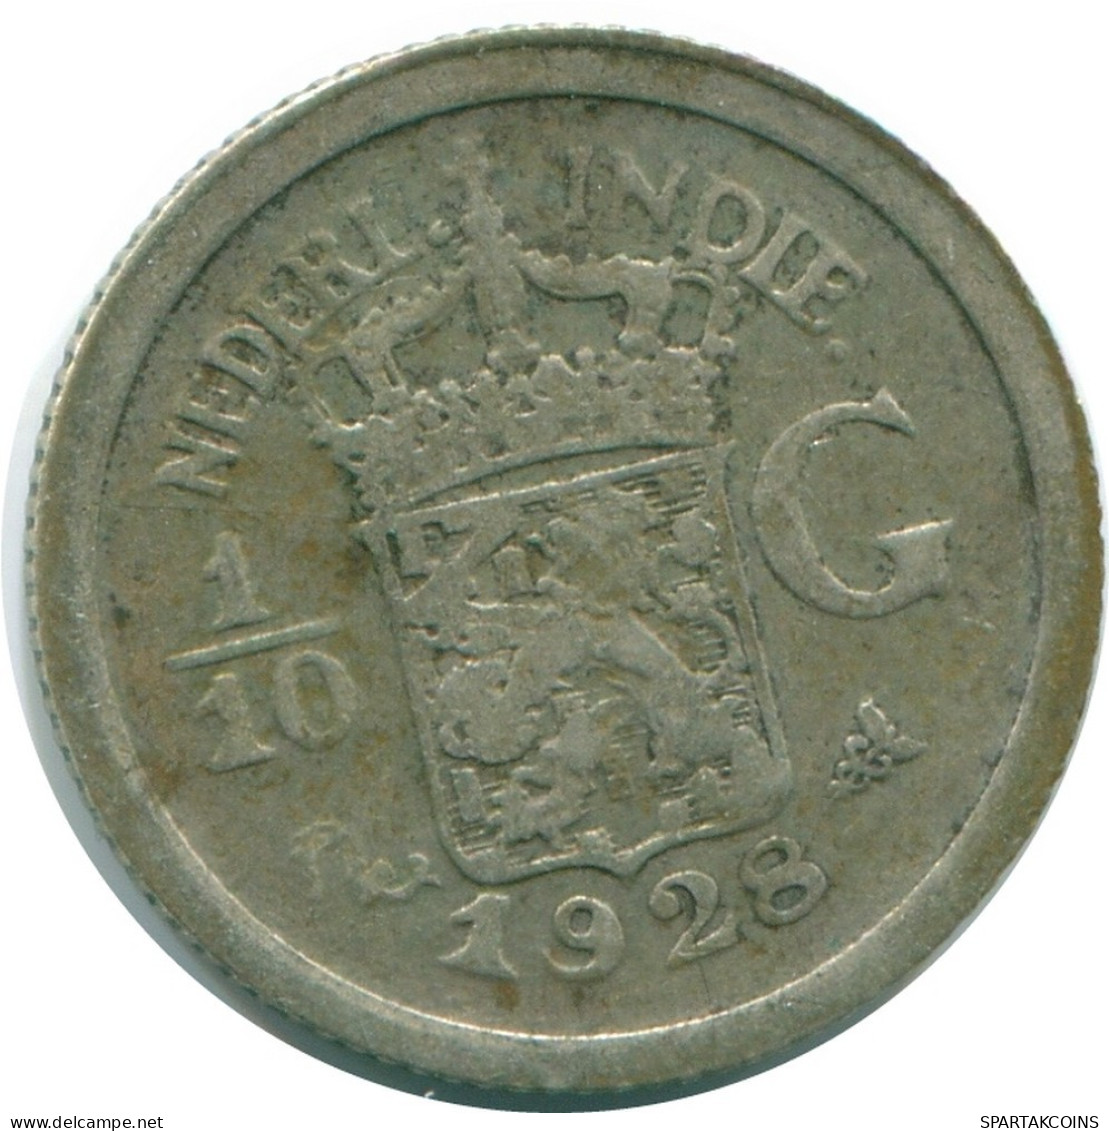 1/10 GULDEN 1928 NETHERLANDS EAST INDIES SILVER Colonial Coin #NL13437.3.U.A - Indie Olandesi